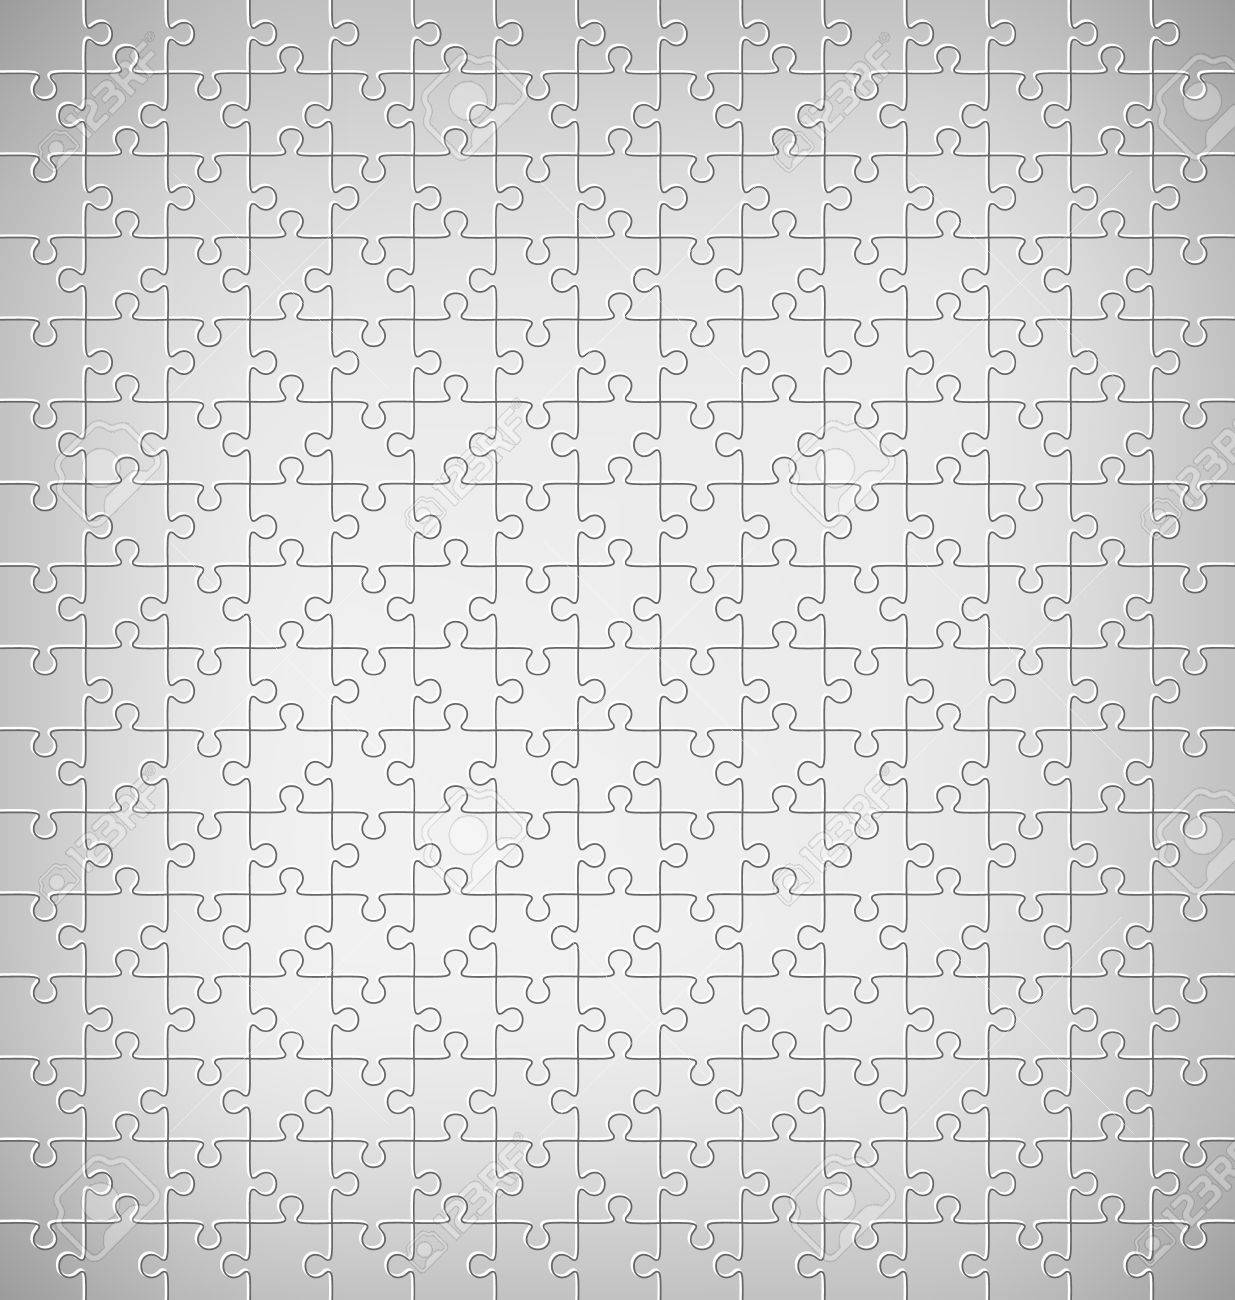 Jigsaw Puzzle Pattern On Grayscale Background Royalty